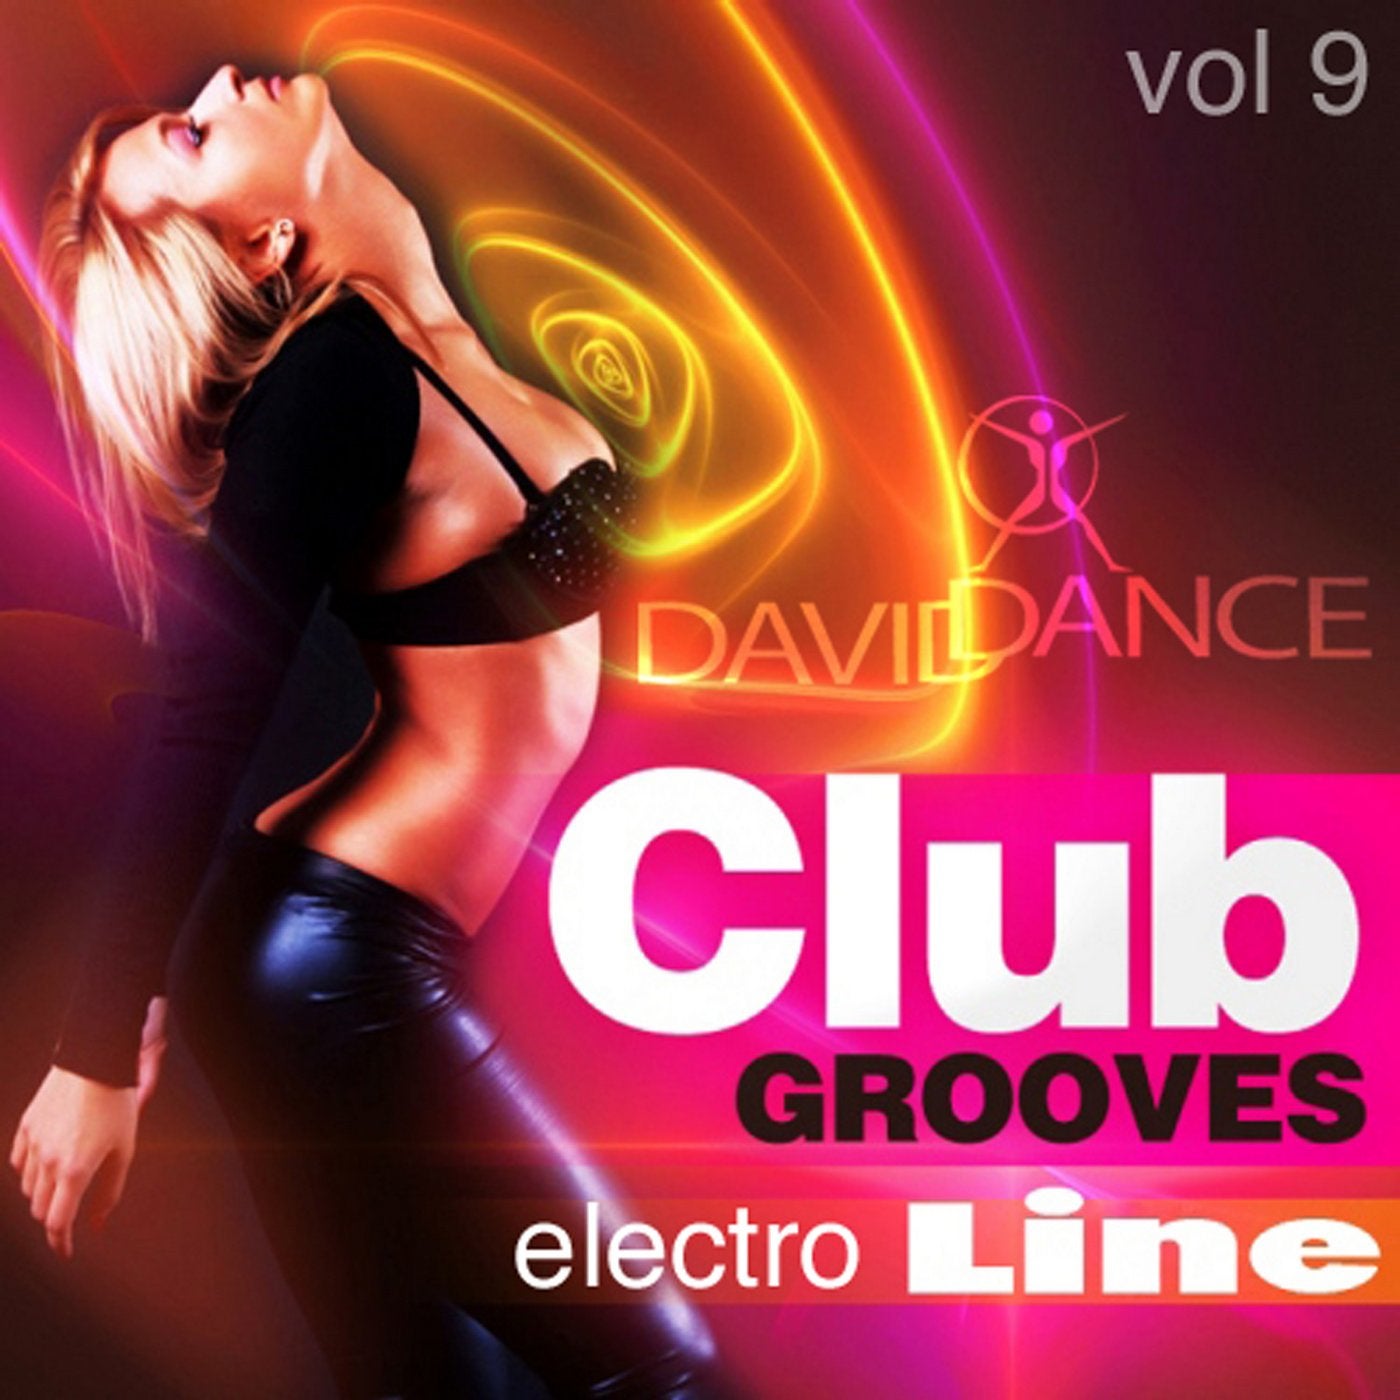 CLUB GROOVES - ELECTRO LINE Vol 9